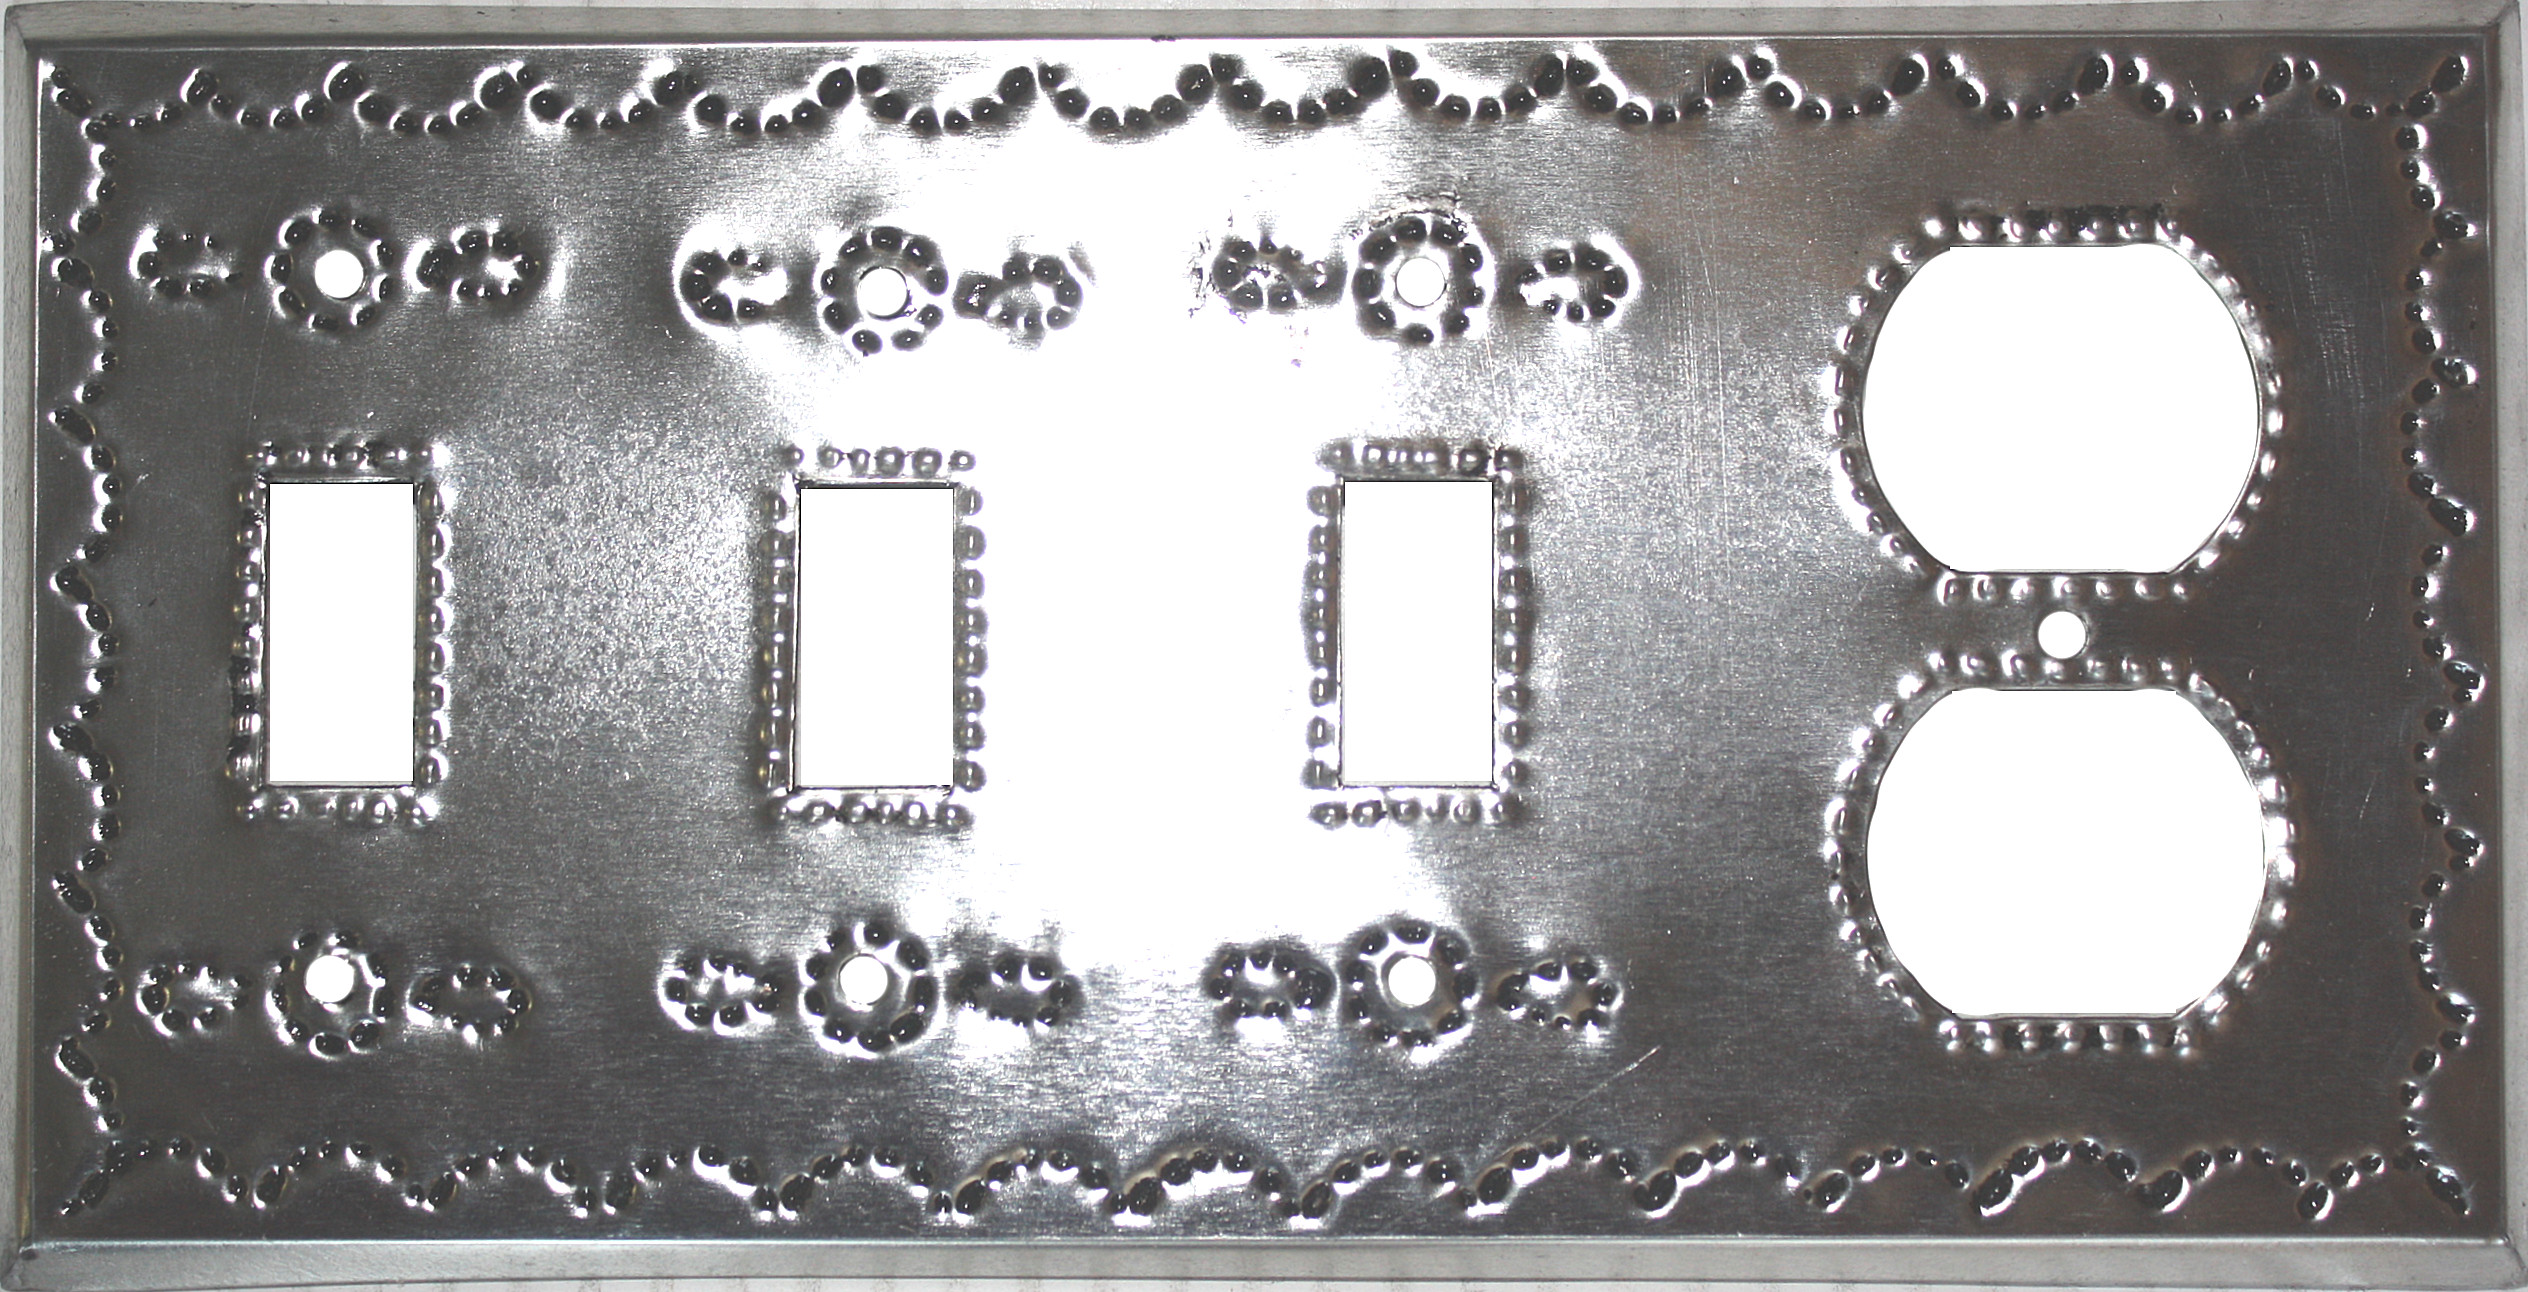 Triple Toggle-Outlet Silver Tin Switchplate